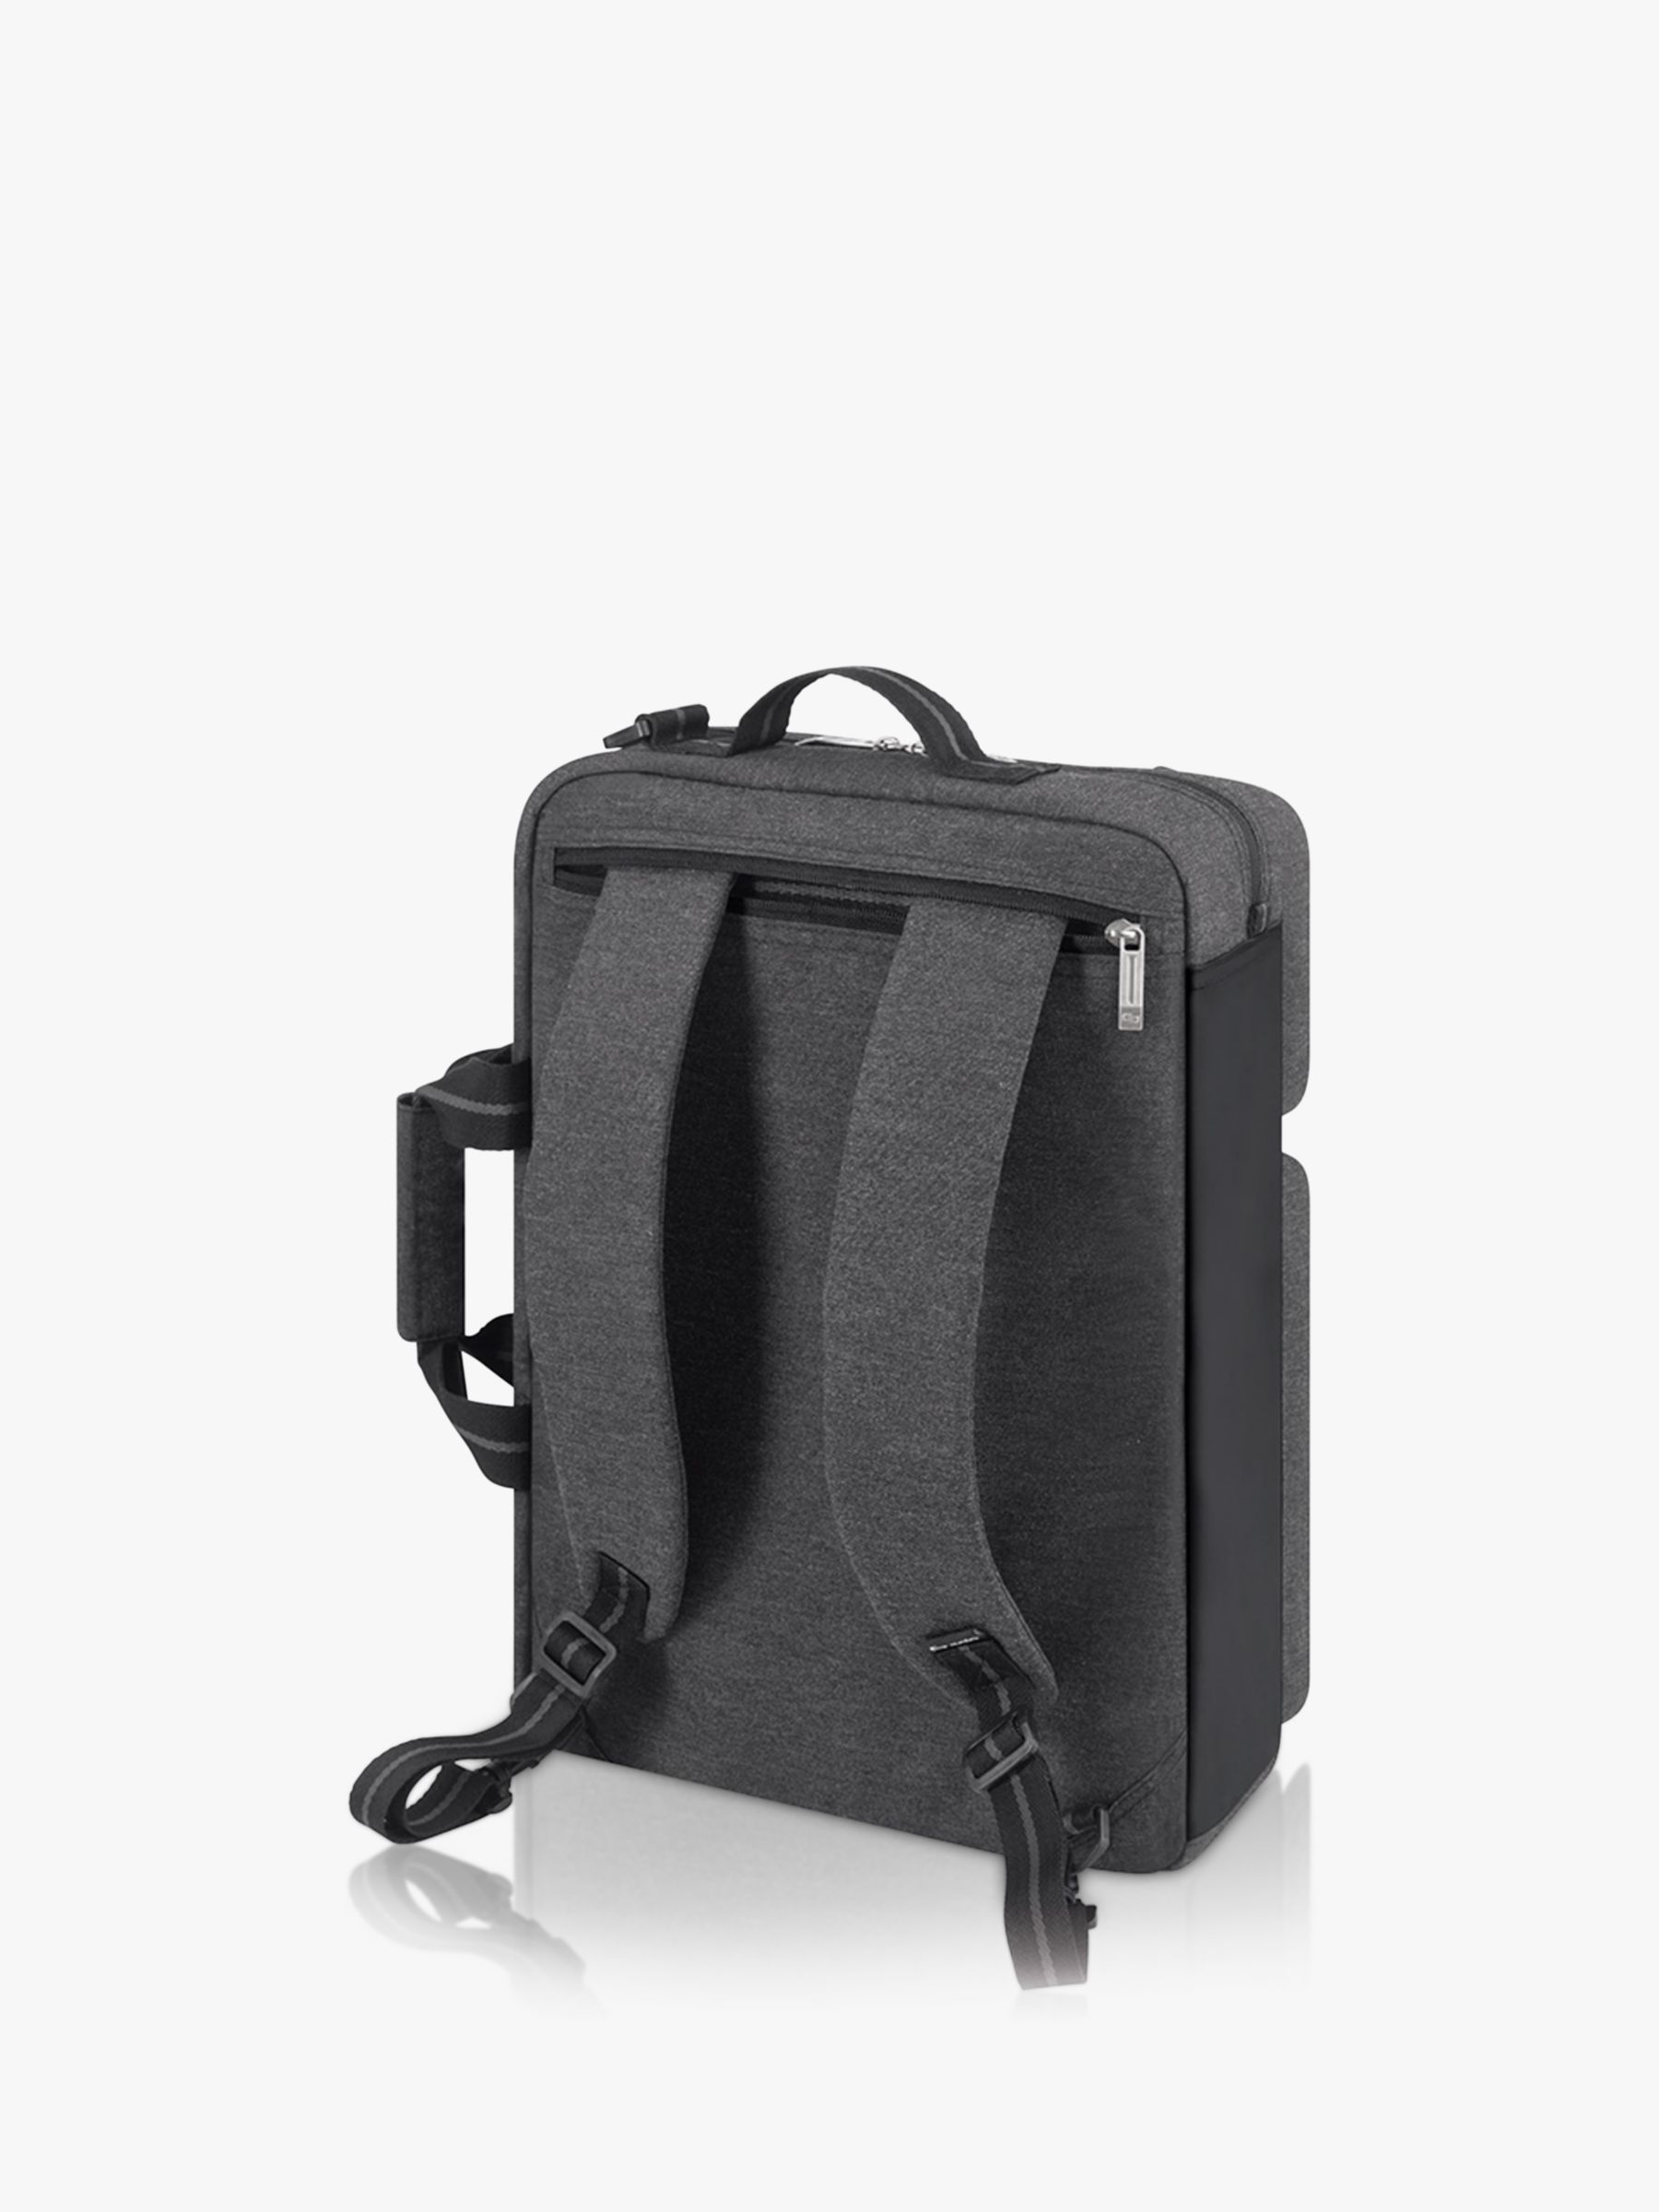 Solo NY Duane Convertible Briefcase Backpack, Grey